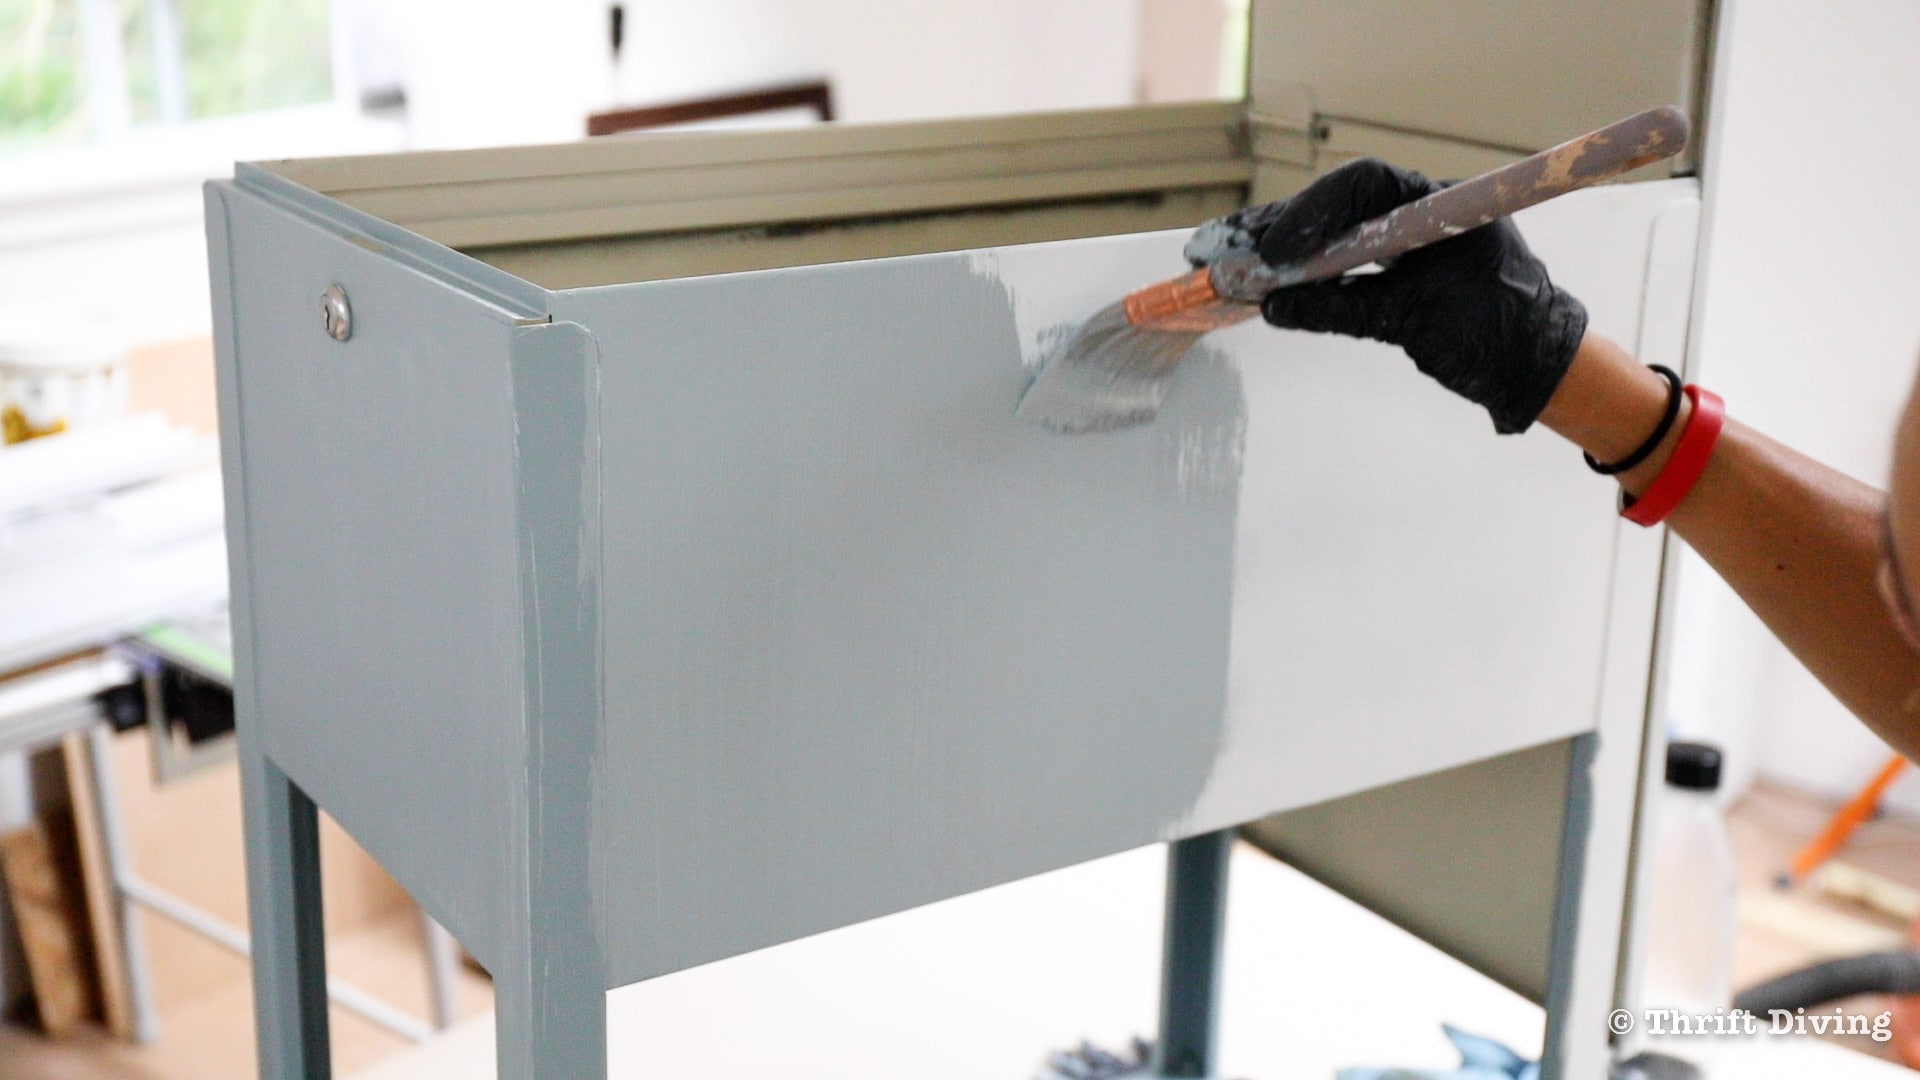 How to Paint a Metal File Cabinet - Paint the metal file cabinet with furniture paint. - Thrift Diving